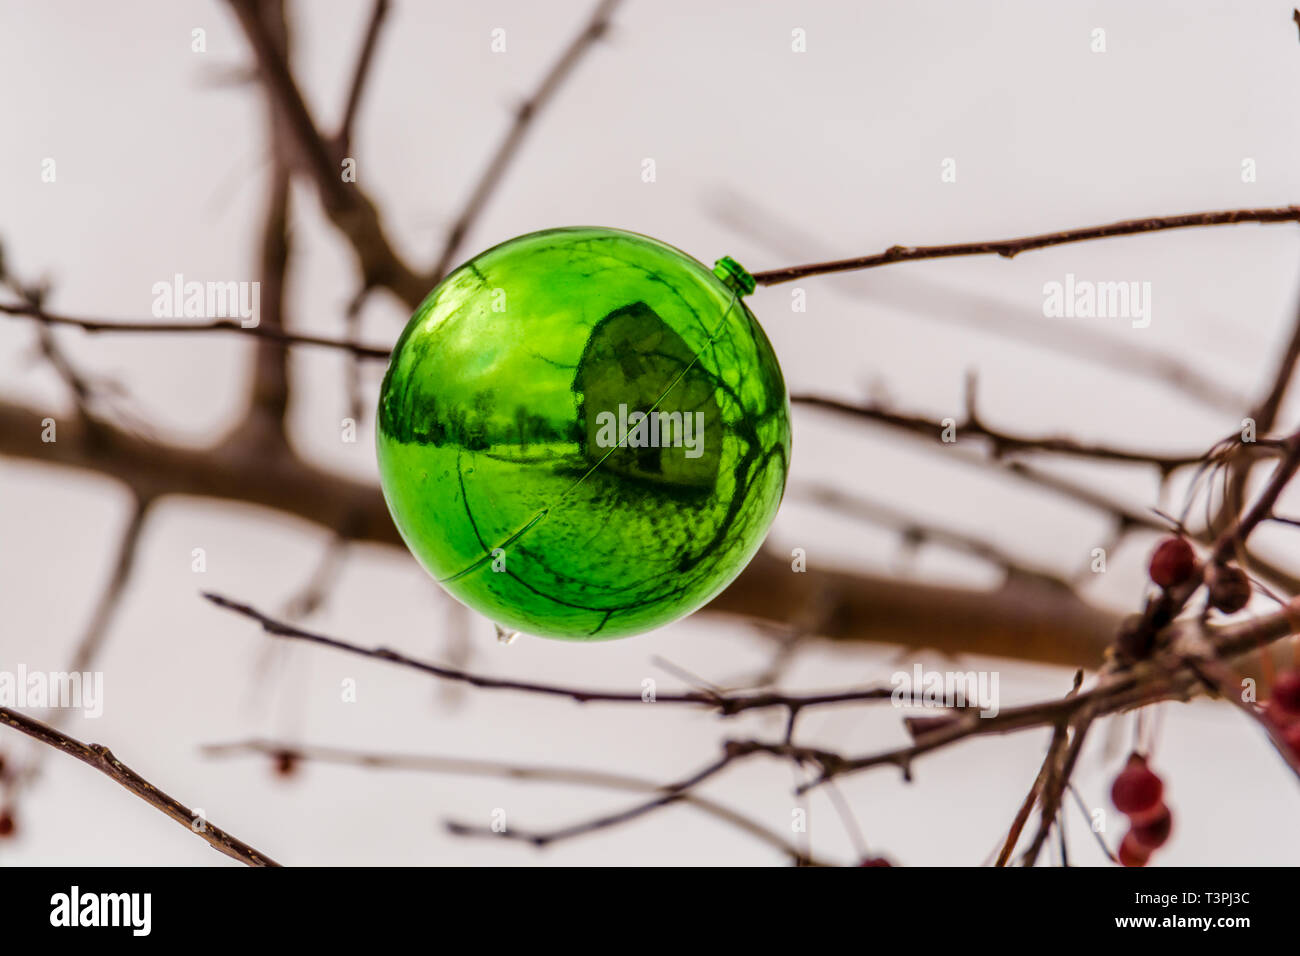 One green Christmas ball ornament hung on winter dry tree branch Stock Photo